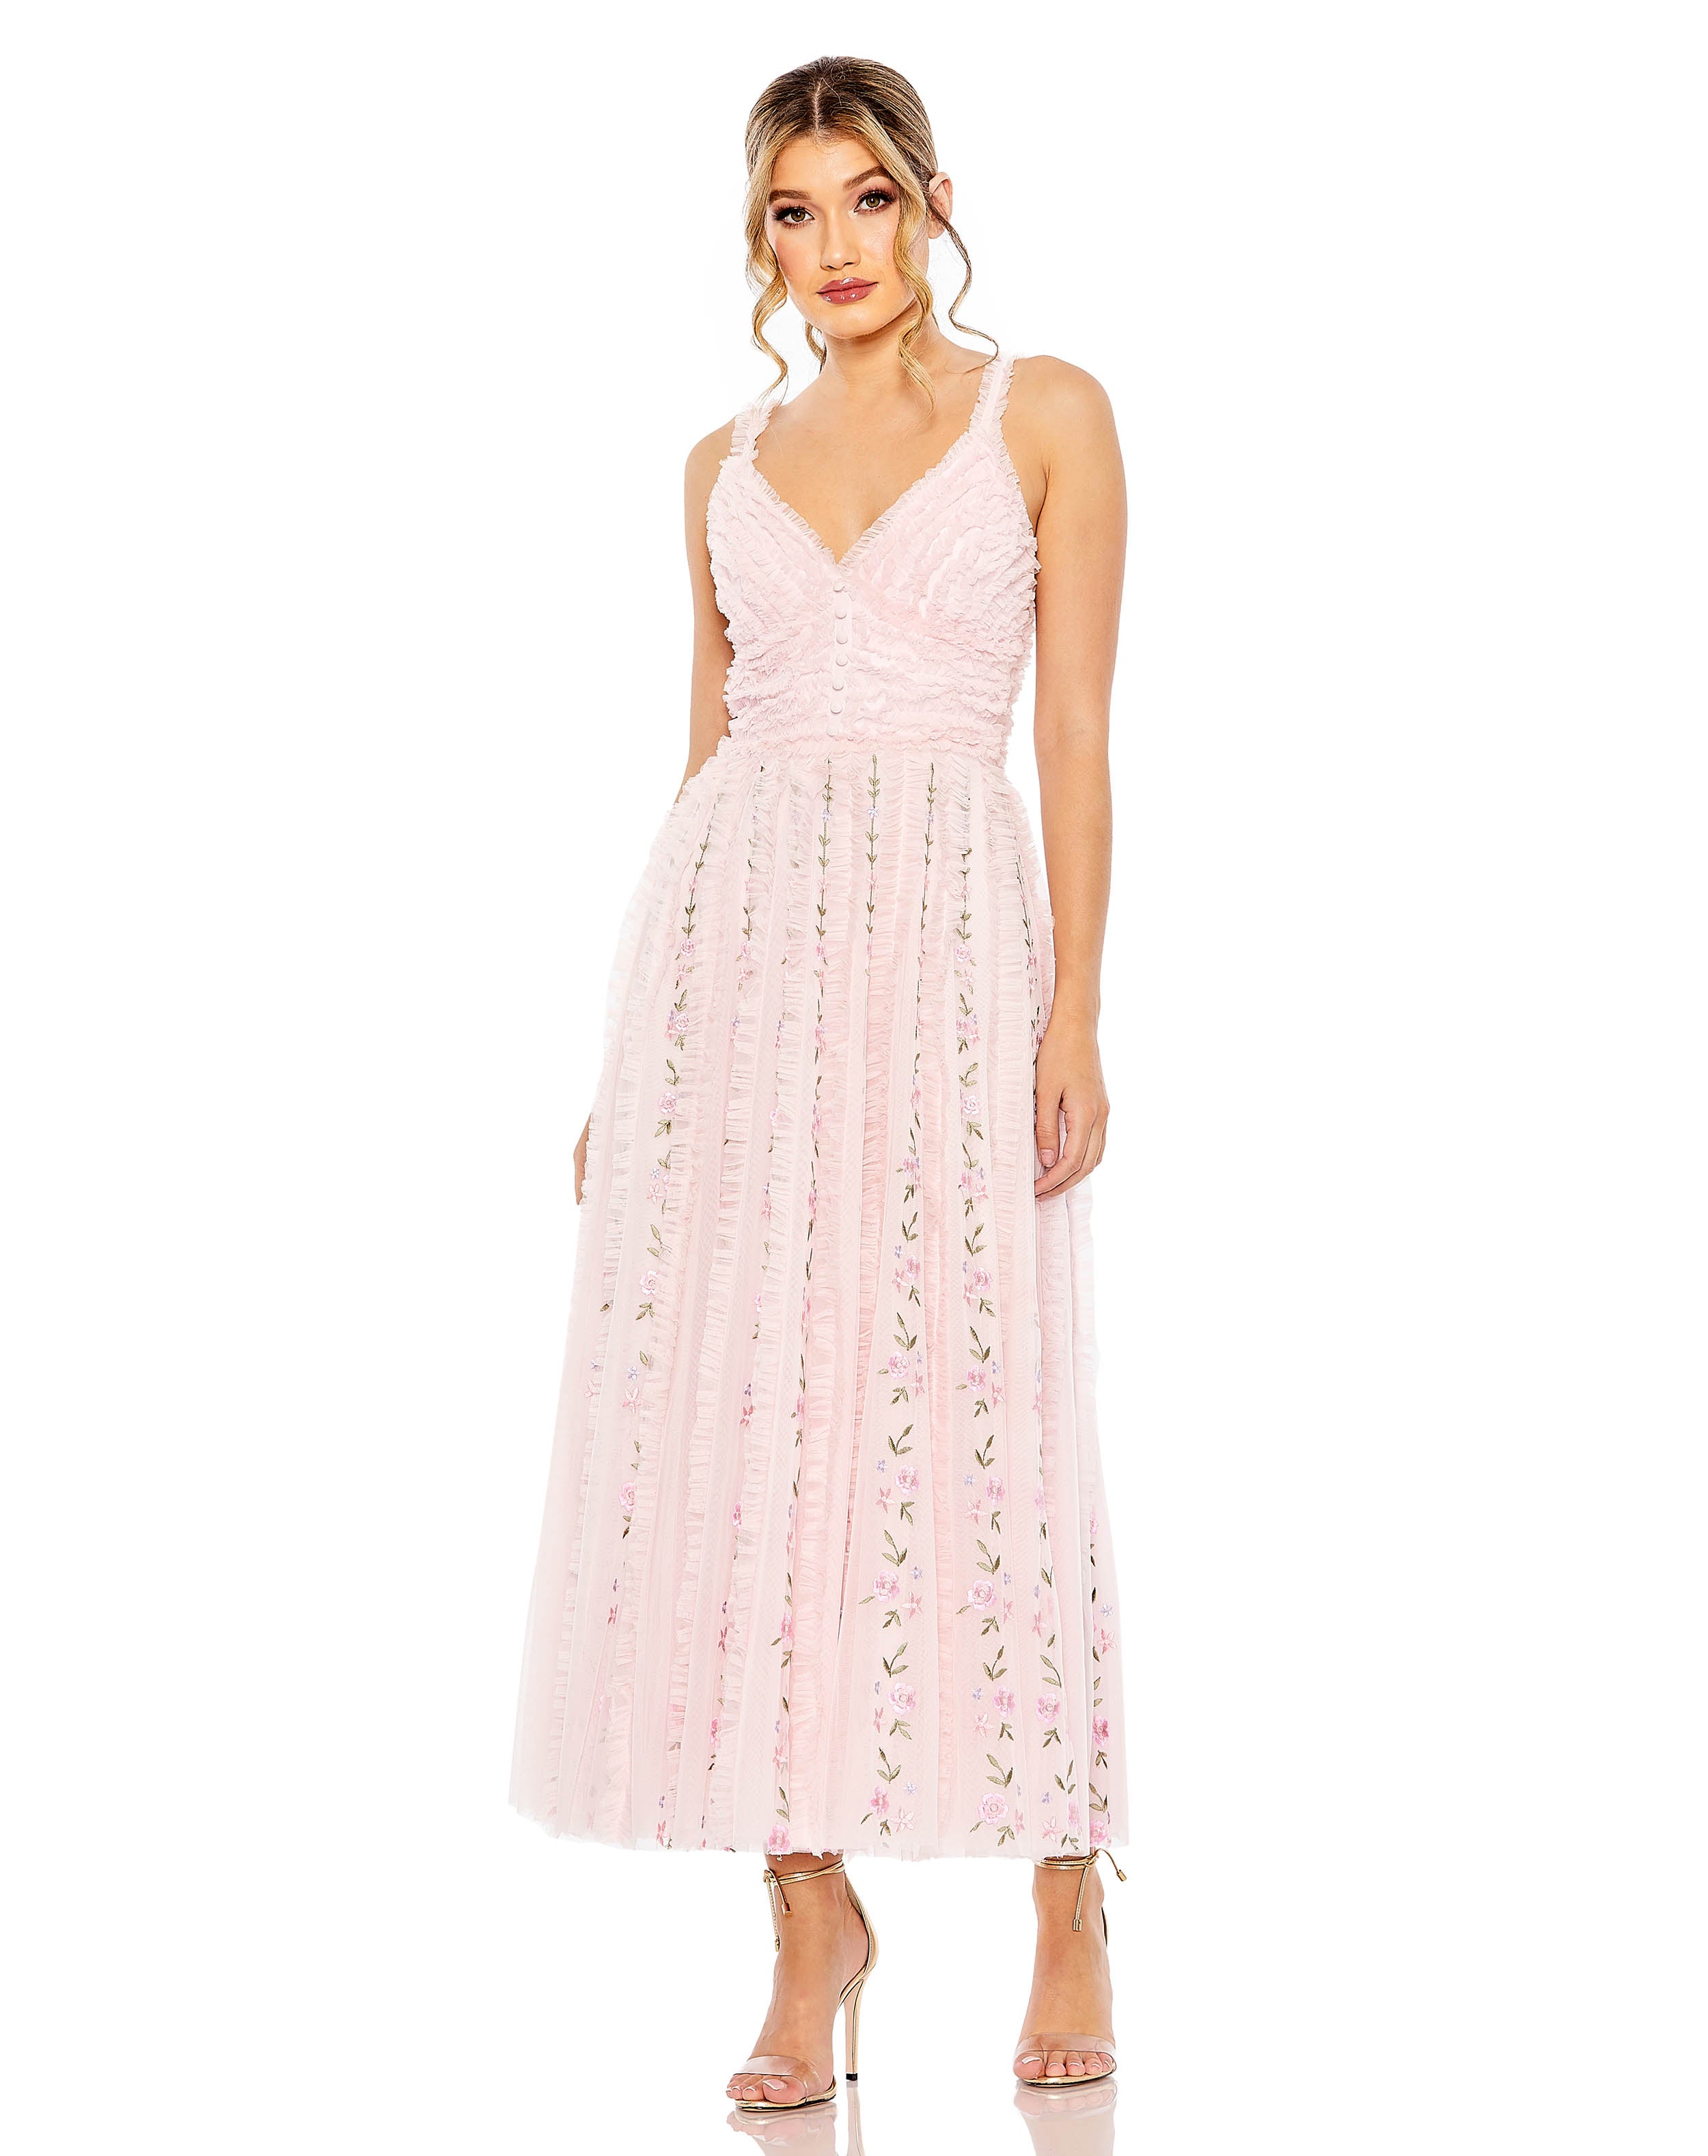 Ruffle Floral Embroidered Detail Tea Length Dress